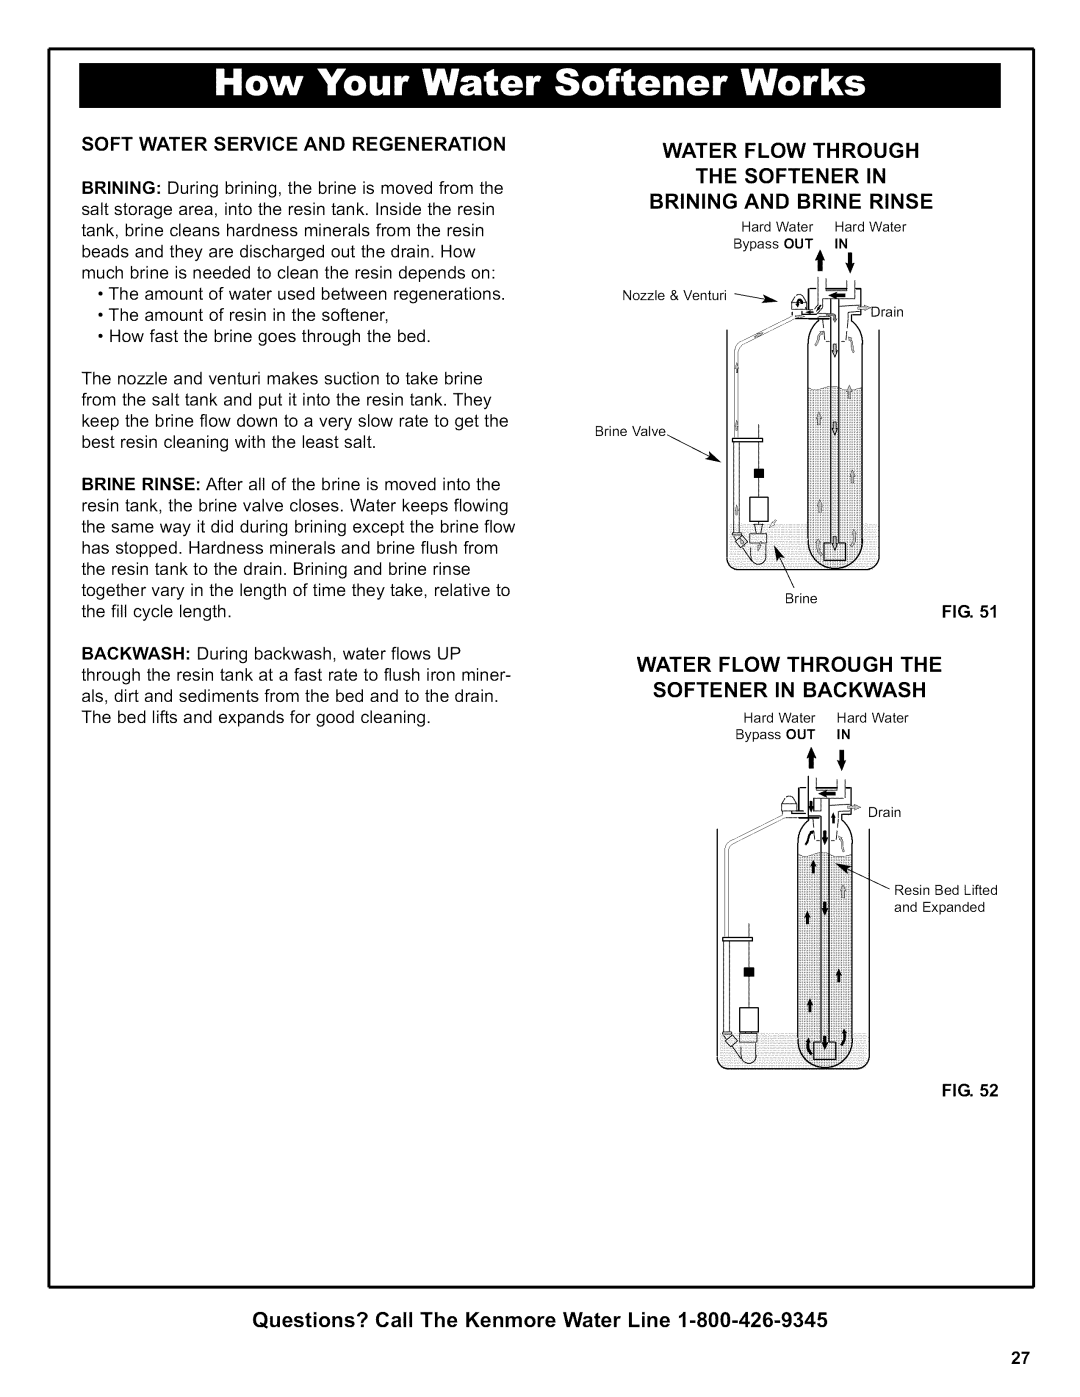 Kenmore 625.38376 Questions? Call The Kenmore, Water Flow Through The Softener In Brining And Brine Rinse, Water Line 